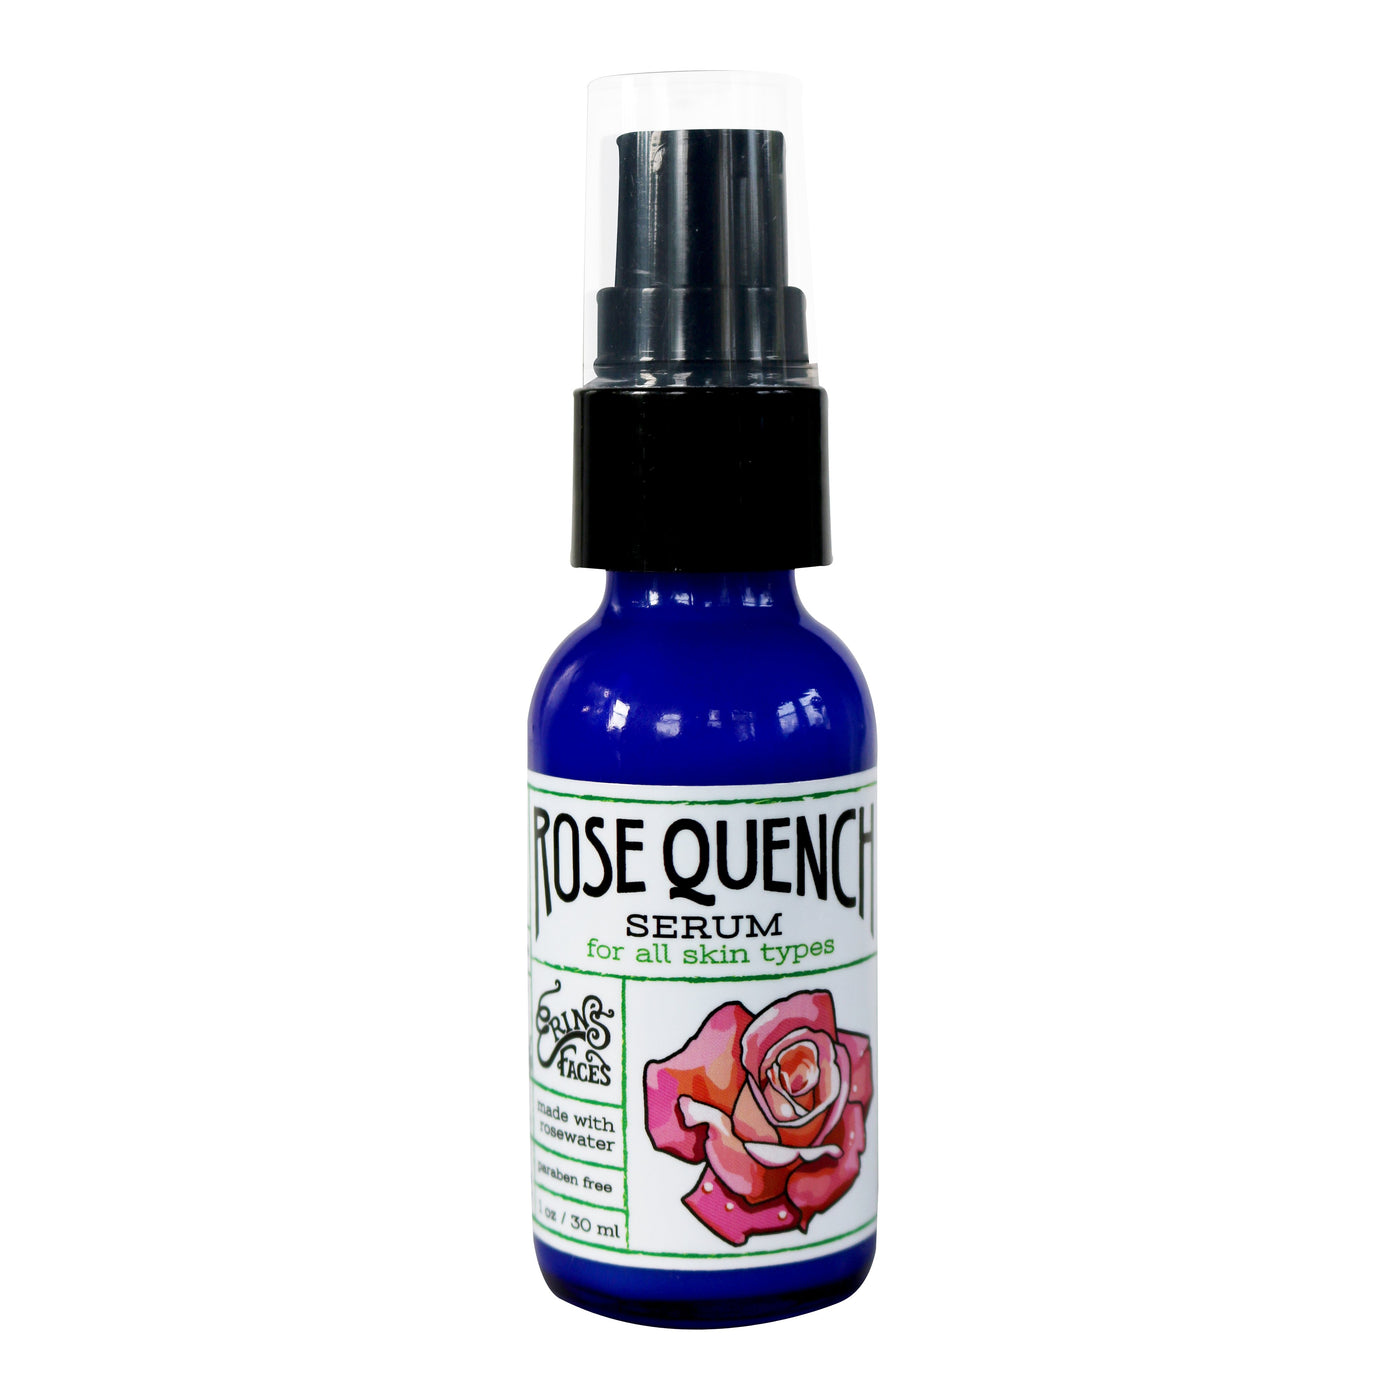 Rose quench serum skincare product in 1 oz blue bottle with black top with white label wrapped around